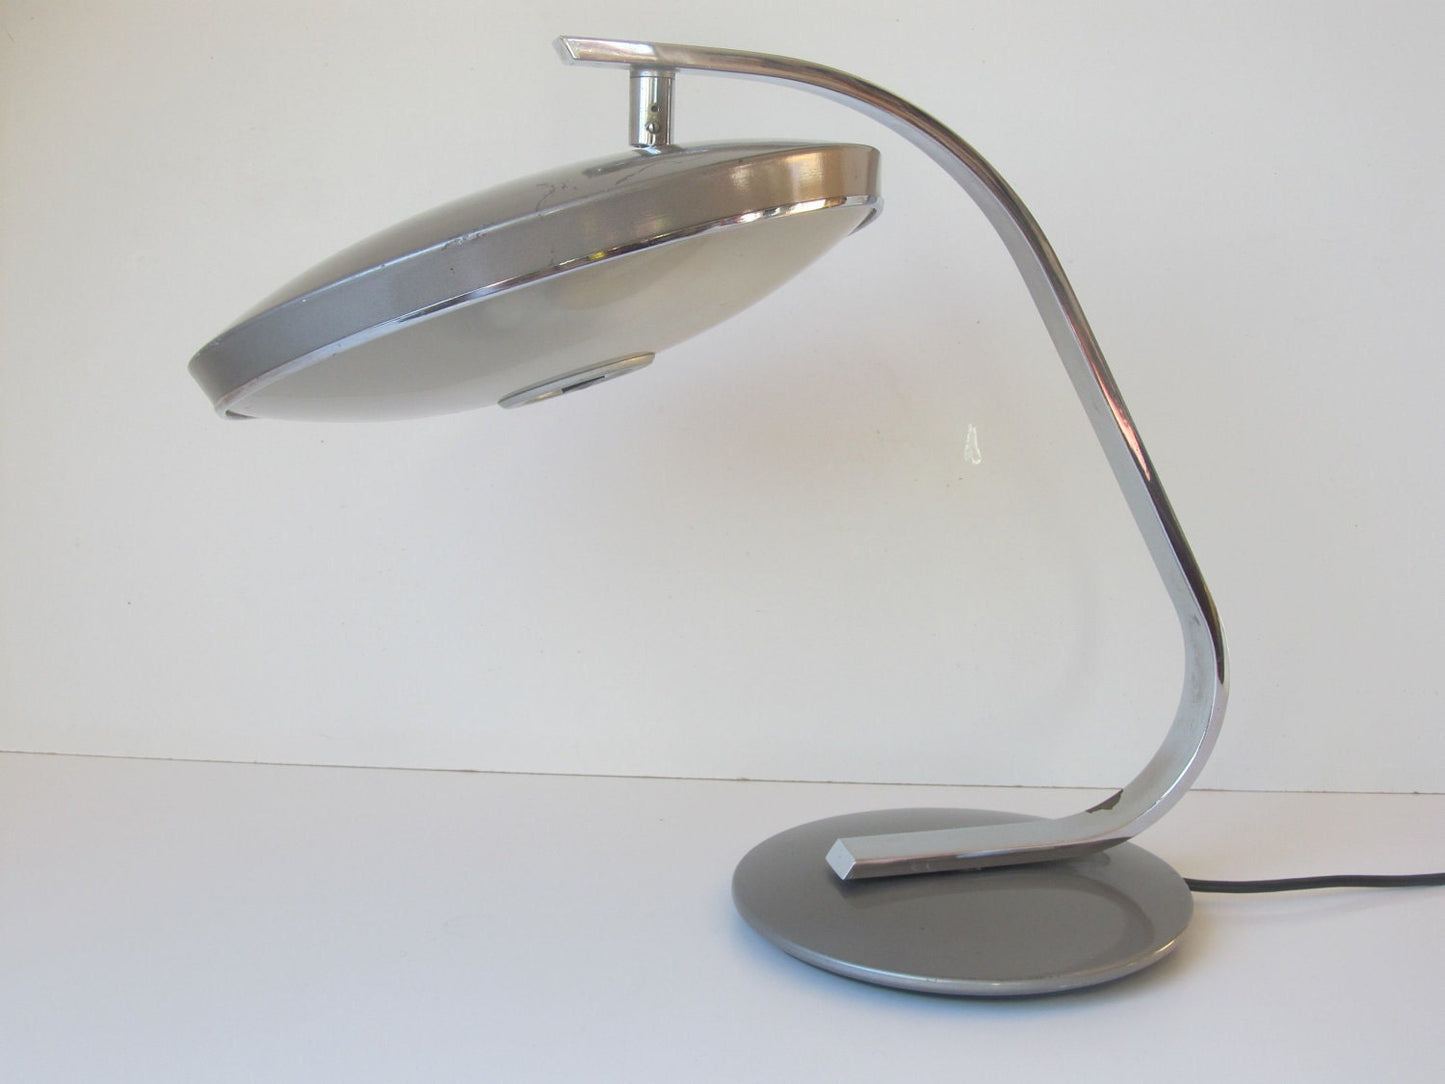 Fase Lamp Madrid space age Table or Desk Lamp, Spanish mid-century modernist lamp from the 1970s